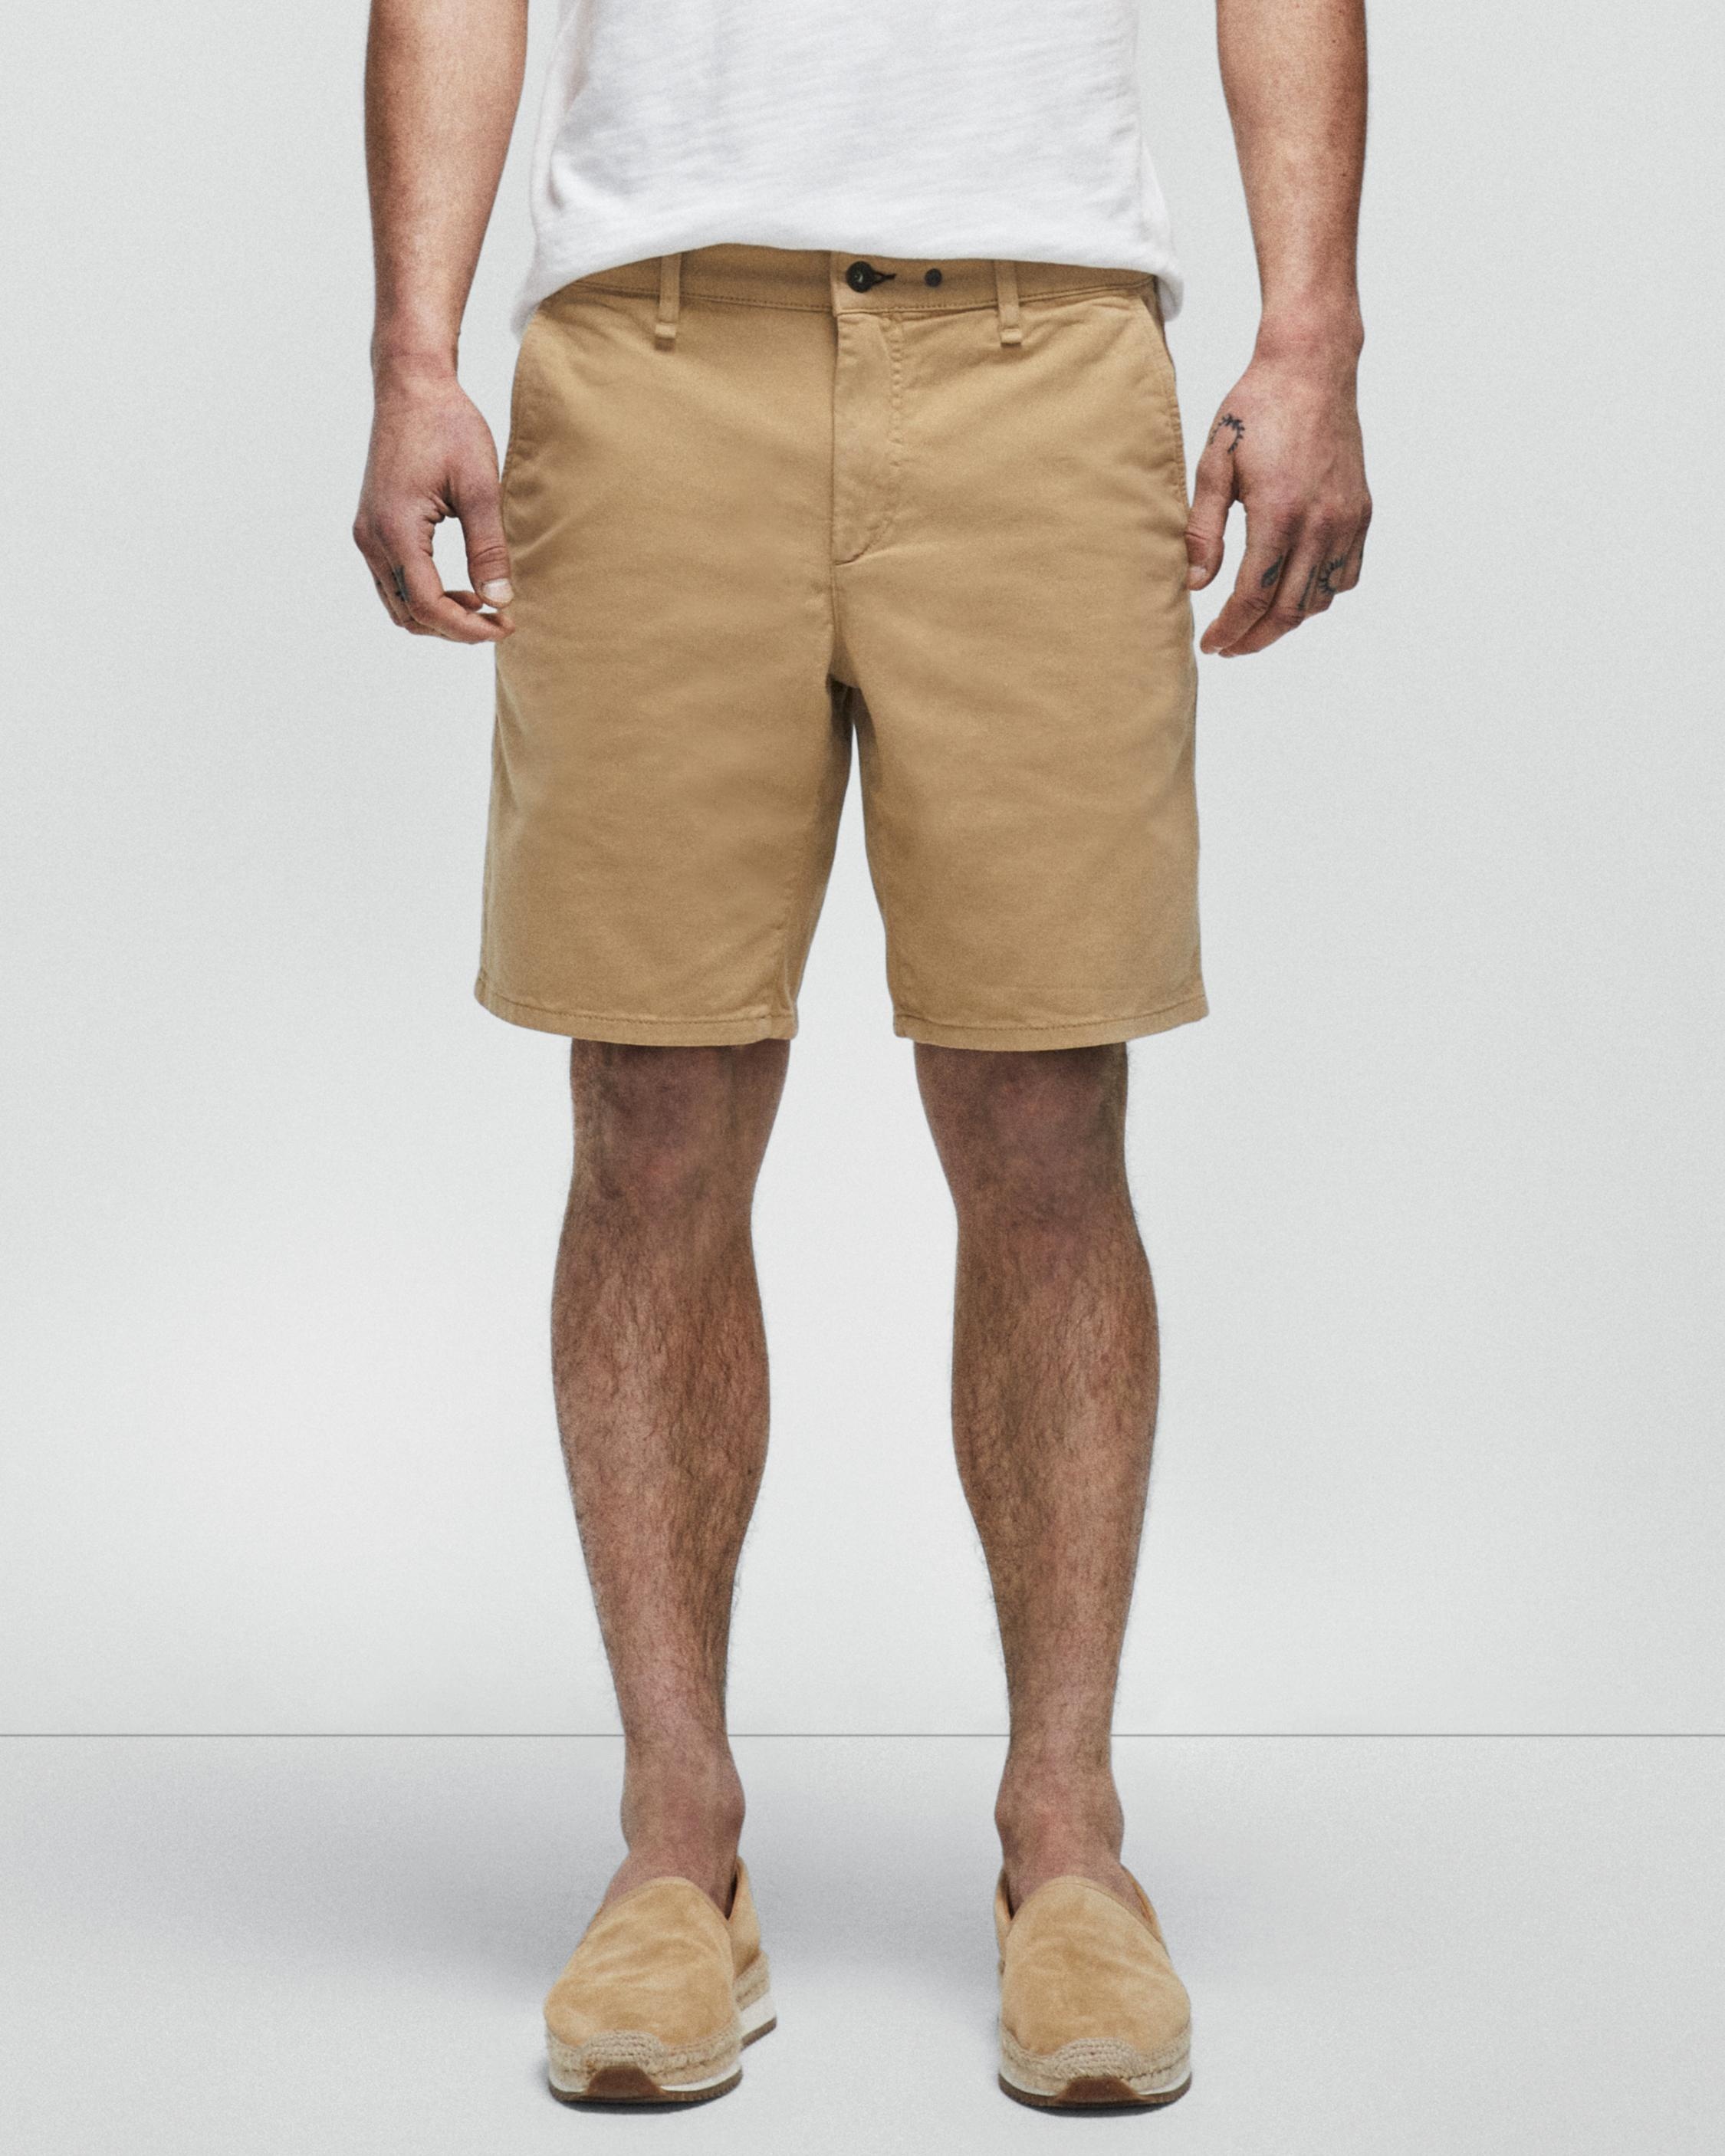 Perry Cotton Stretch Twill Short
Slim Fit Short - 4